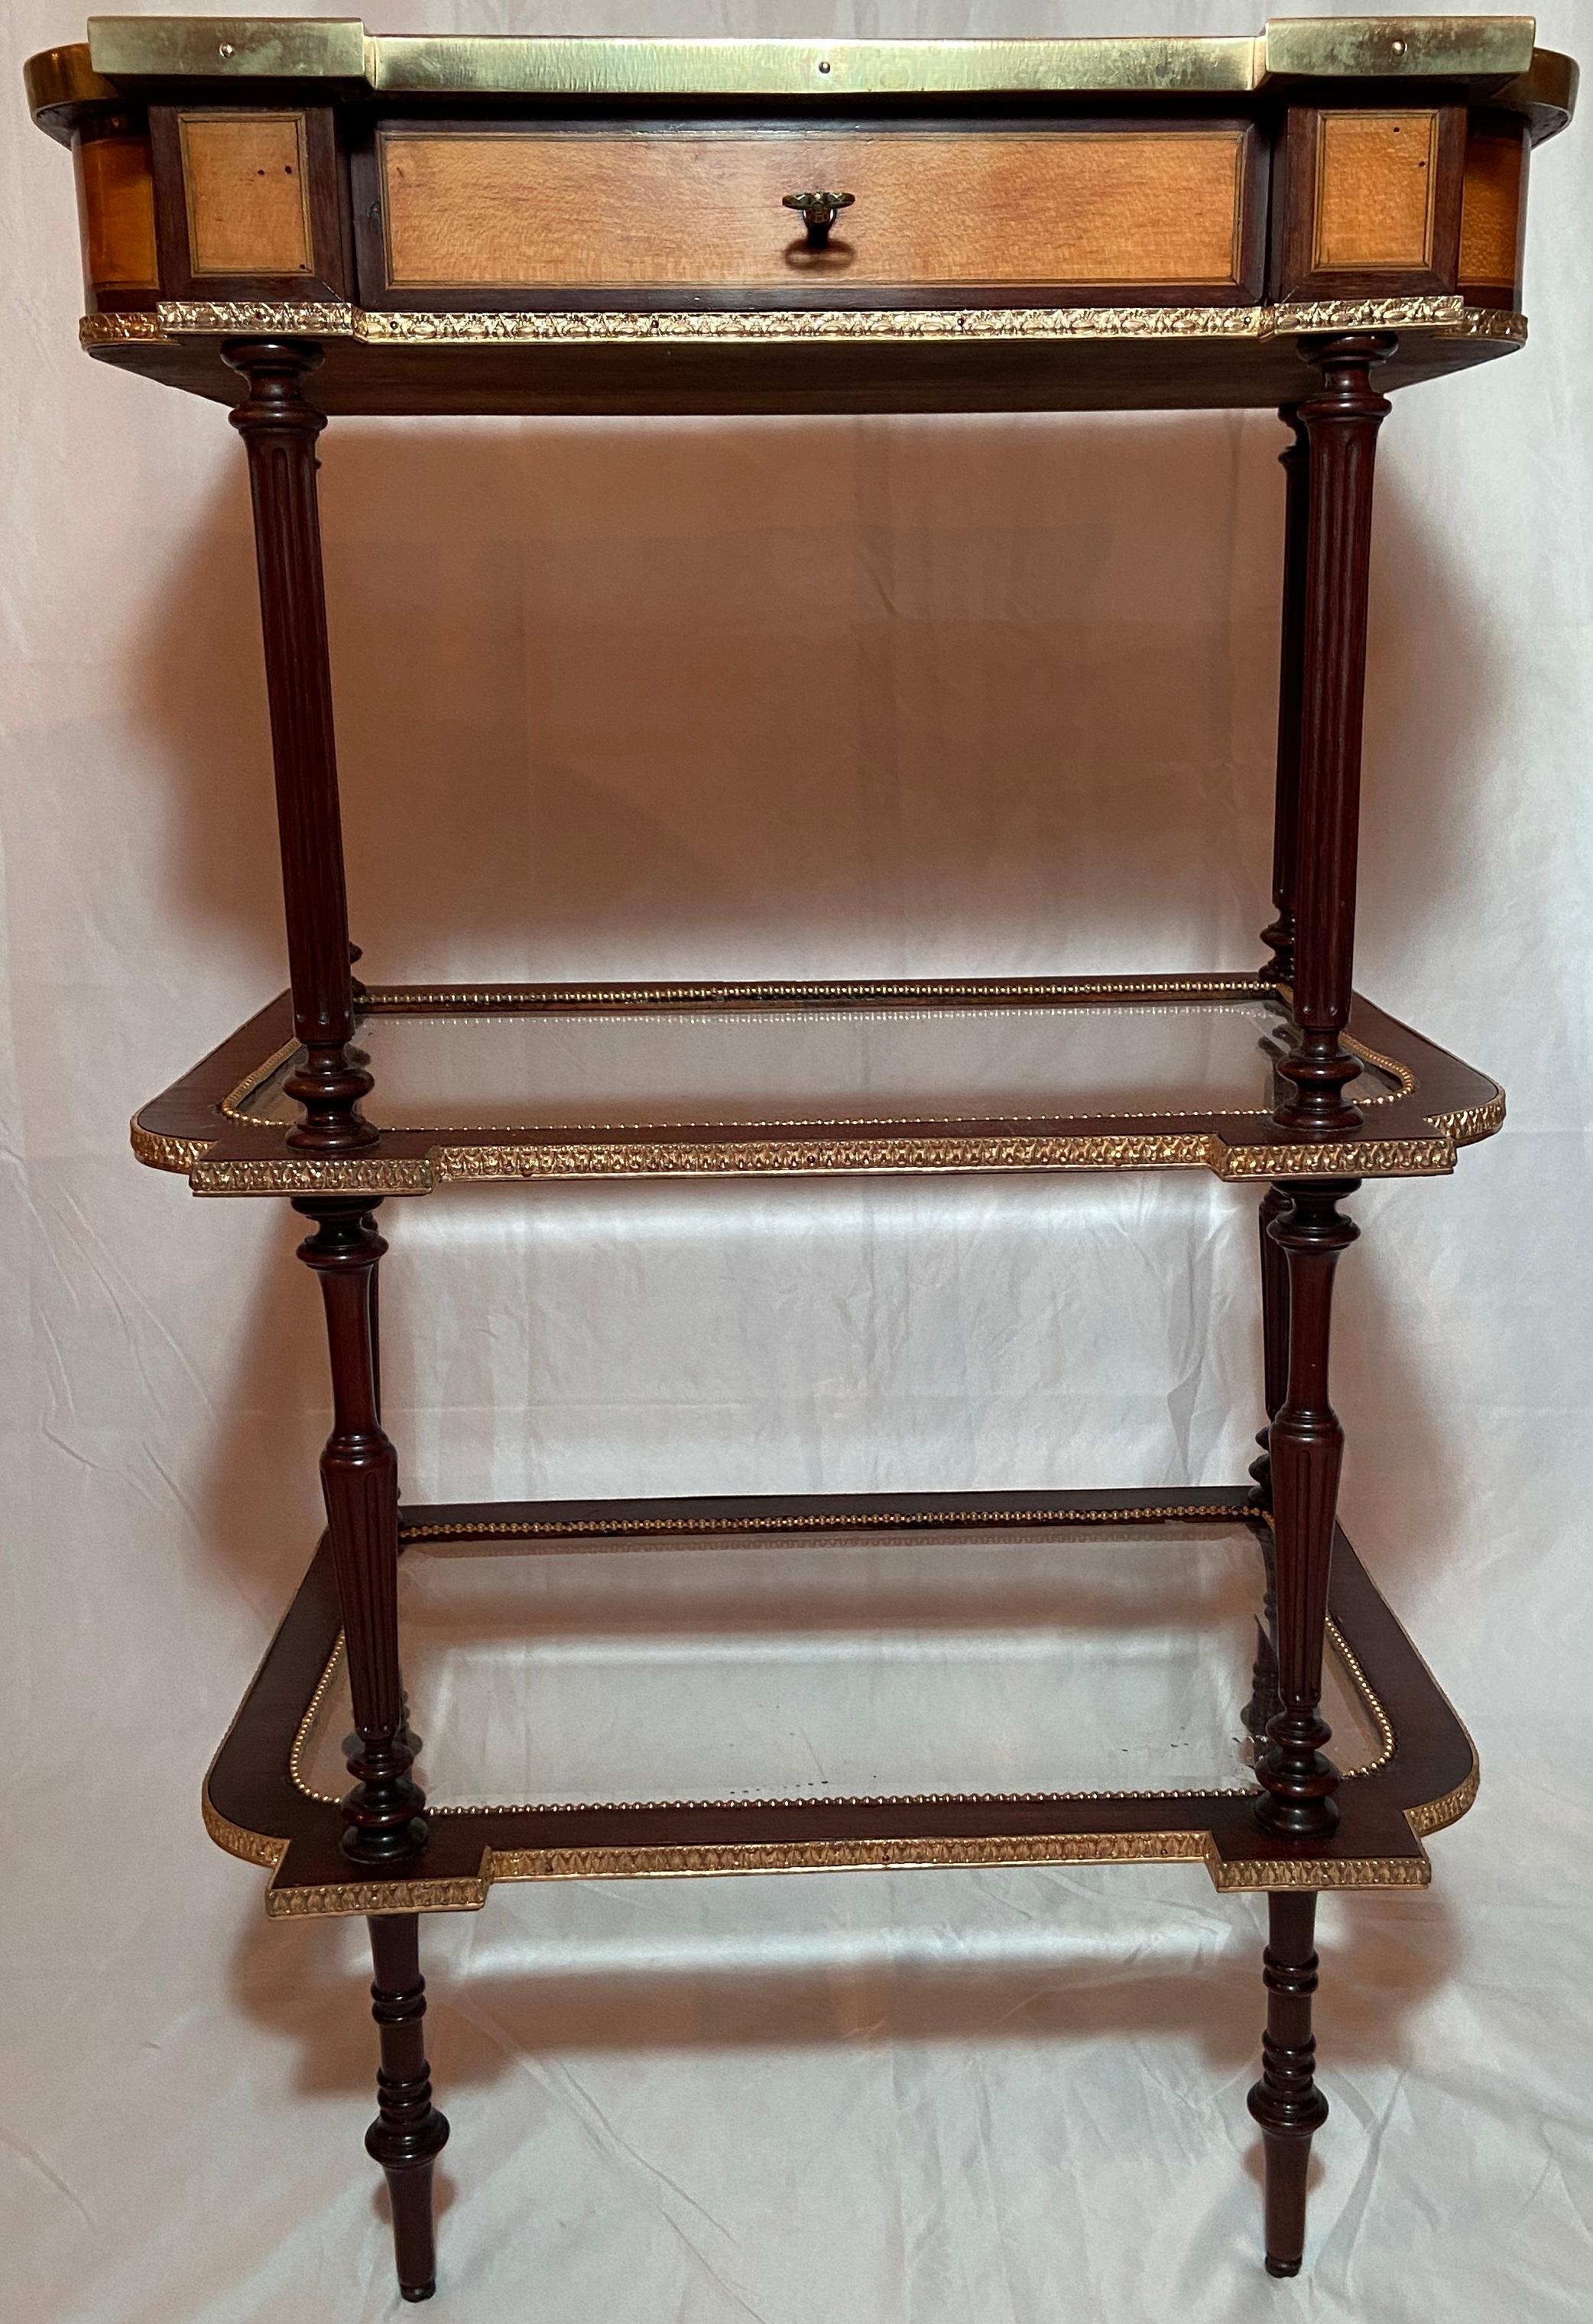 Antique French Marquetry table with Bronze D' Ore Mounts and glass shelves below.